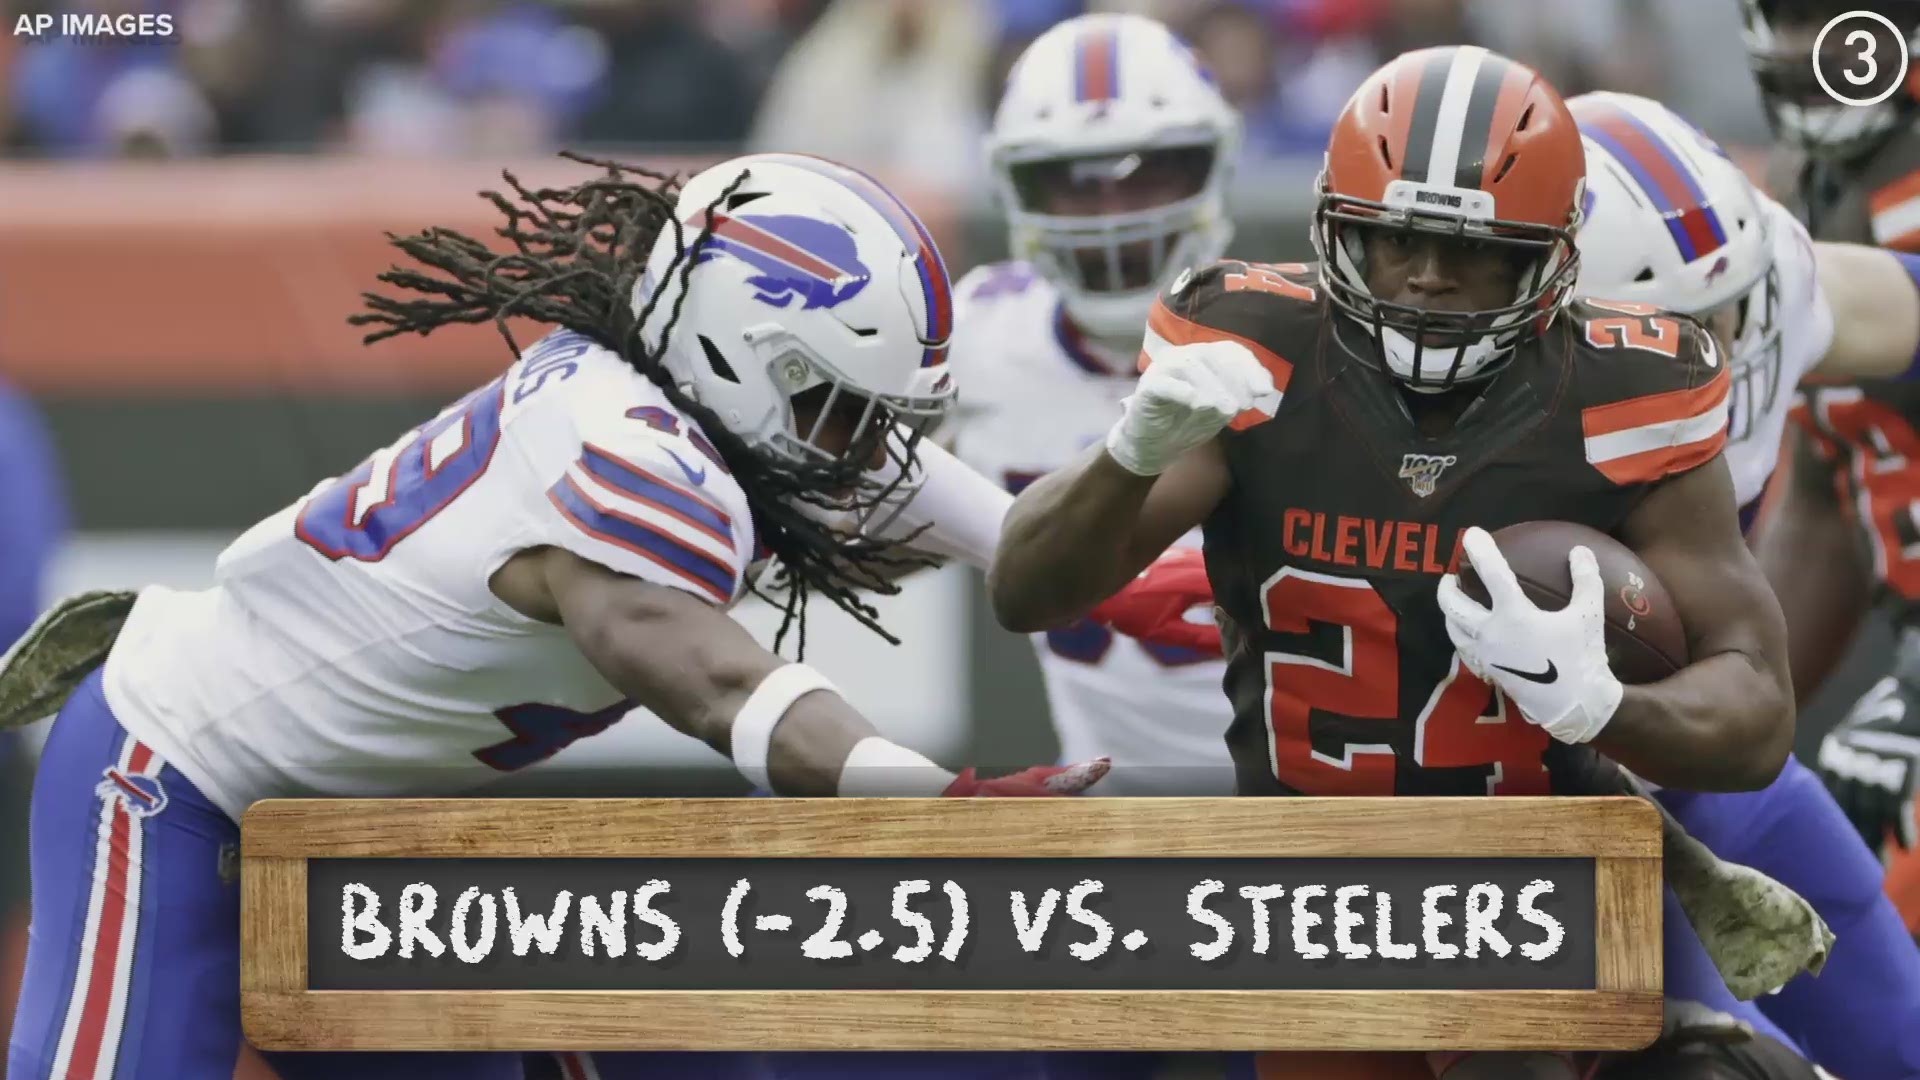 Nick Camino and Ben Axelrod preview the Browns vs. Steelers matchup on Thursday Night Football.